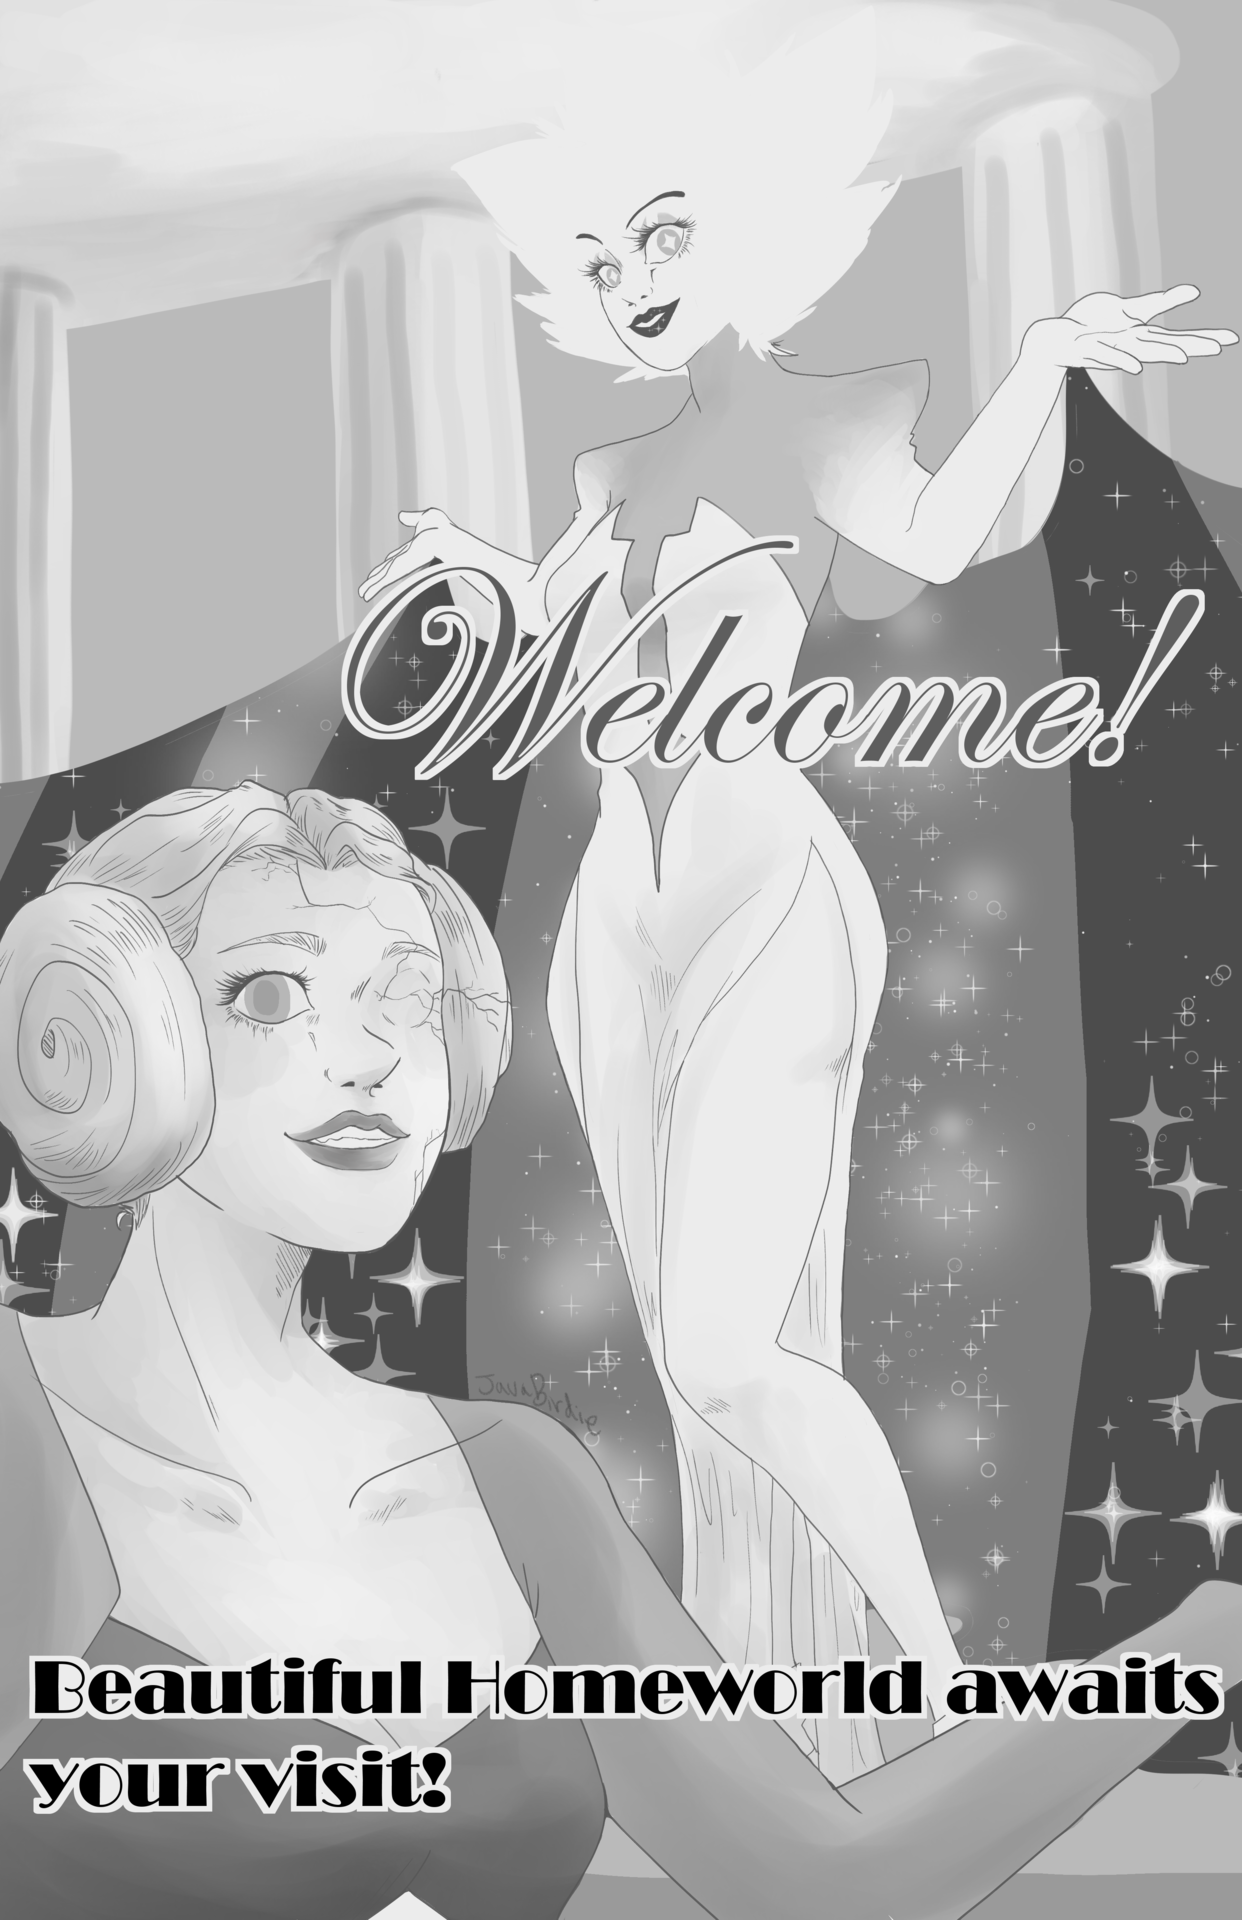 White Diamond and White Pearl remind me of those 1920s posters… Digital painting is hard…..

 cross posted on my twitter here! https://twitter.com/JavaBirdie/status/1021783527287746560